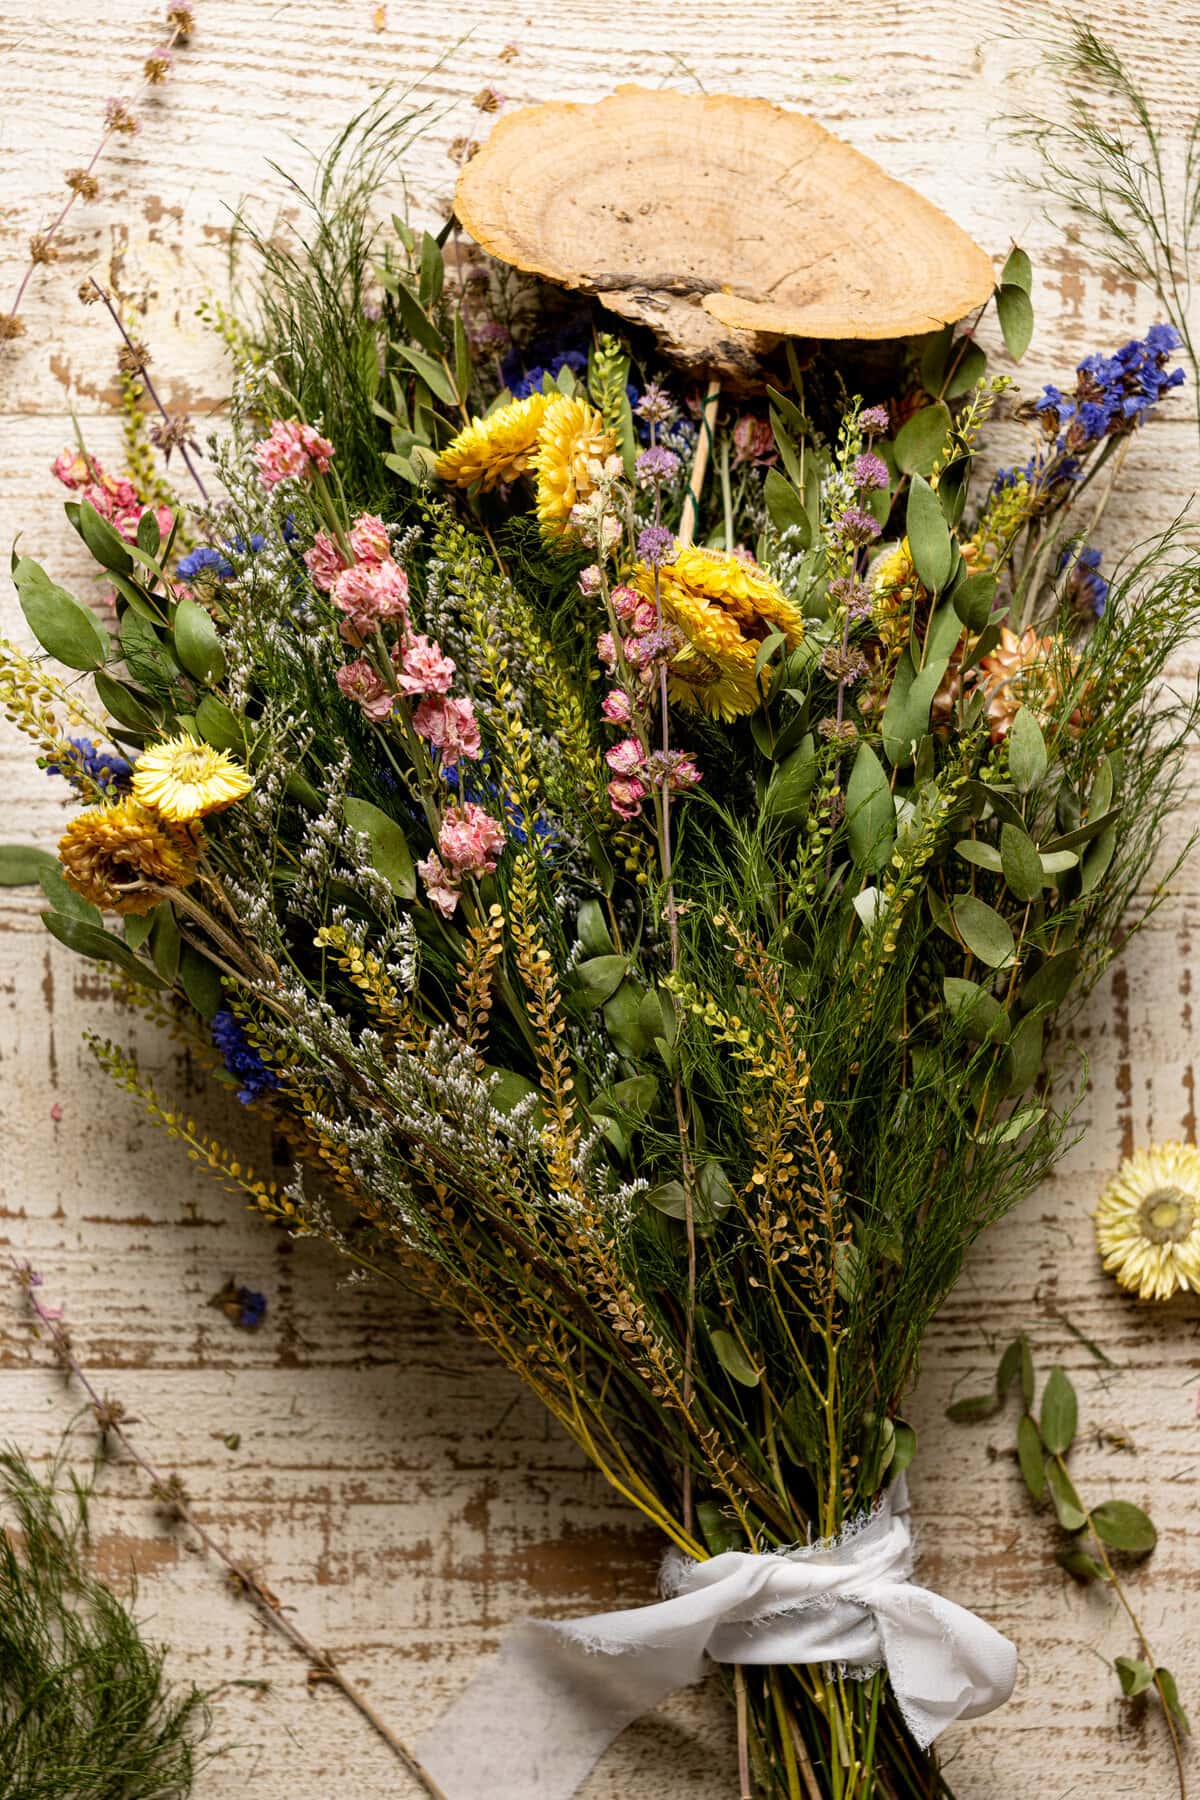 Colorful bouquet of dried flowers